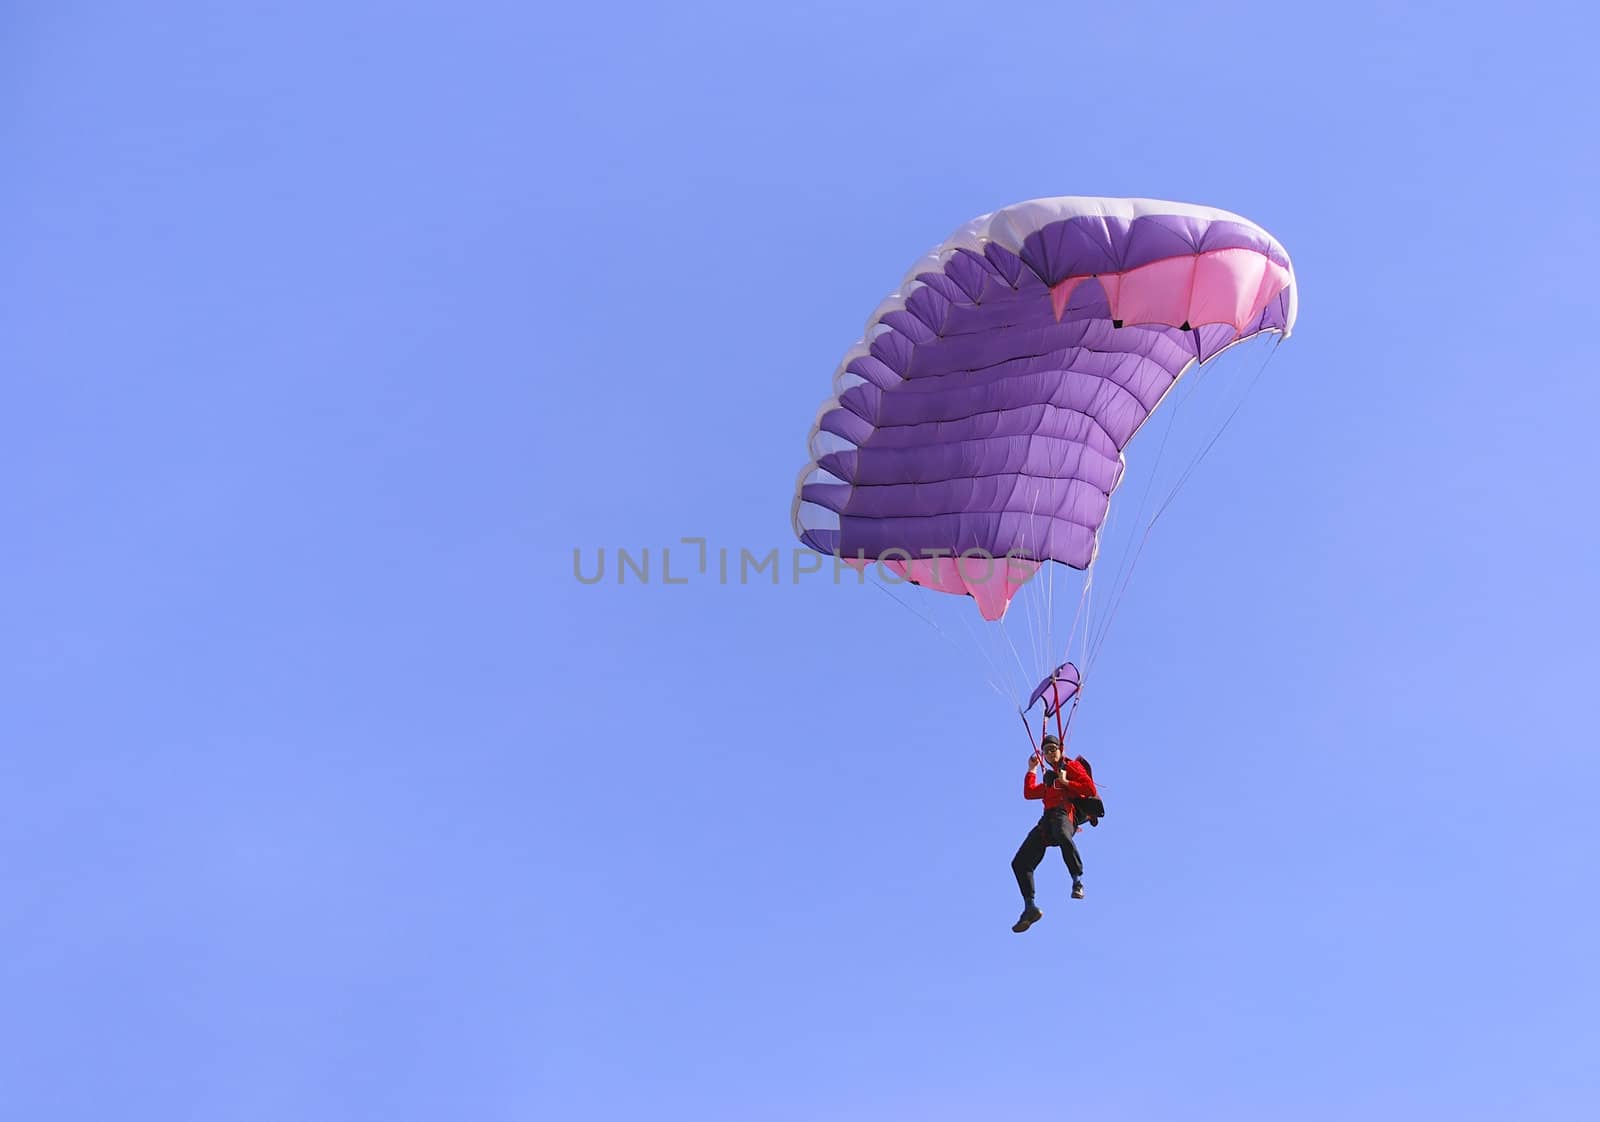 A purple parachute in a blue sky on a sunny day.